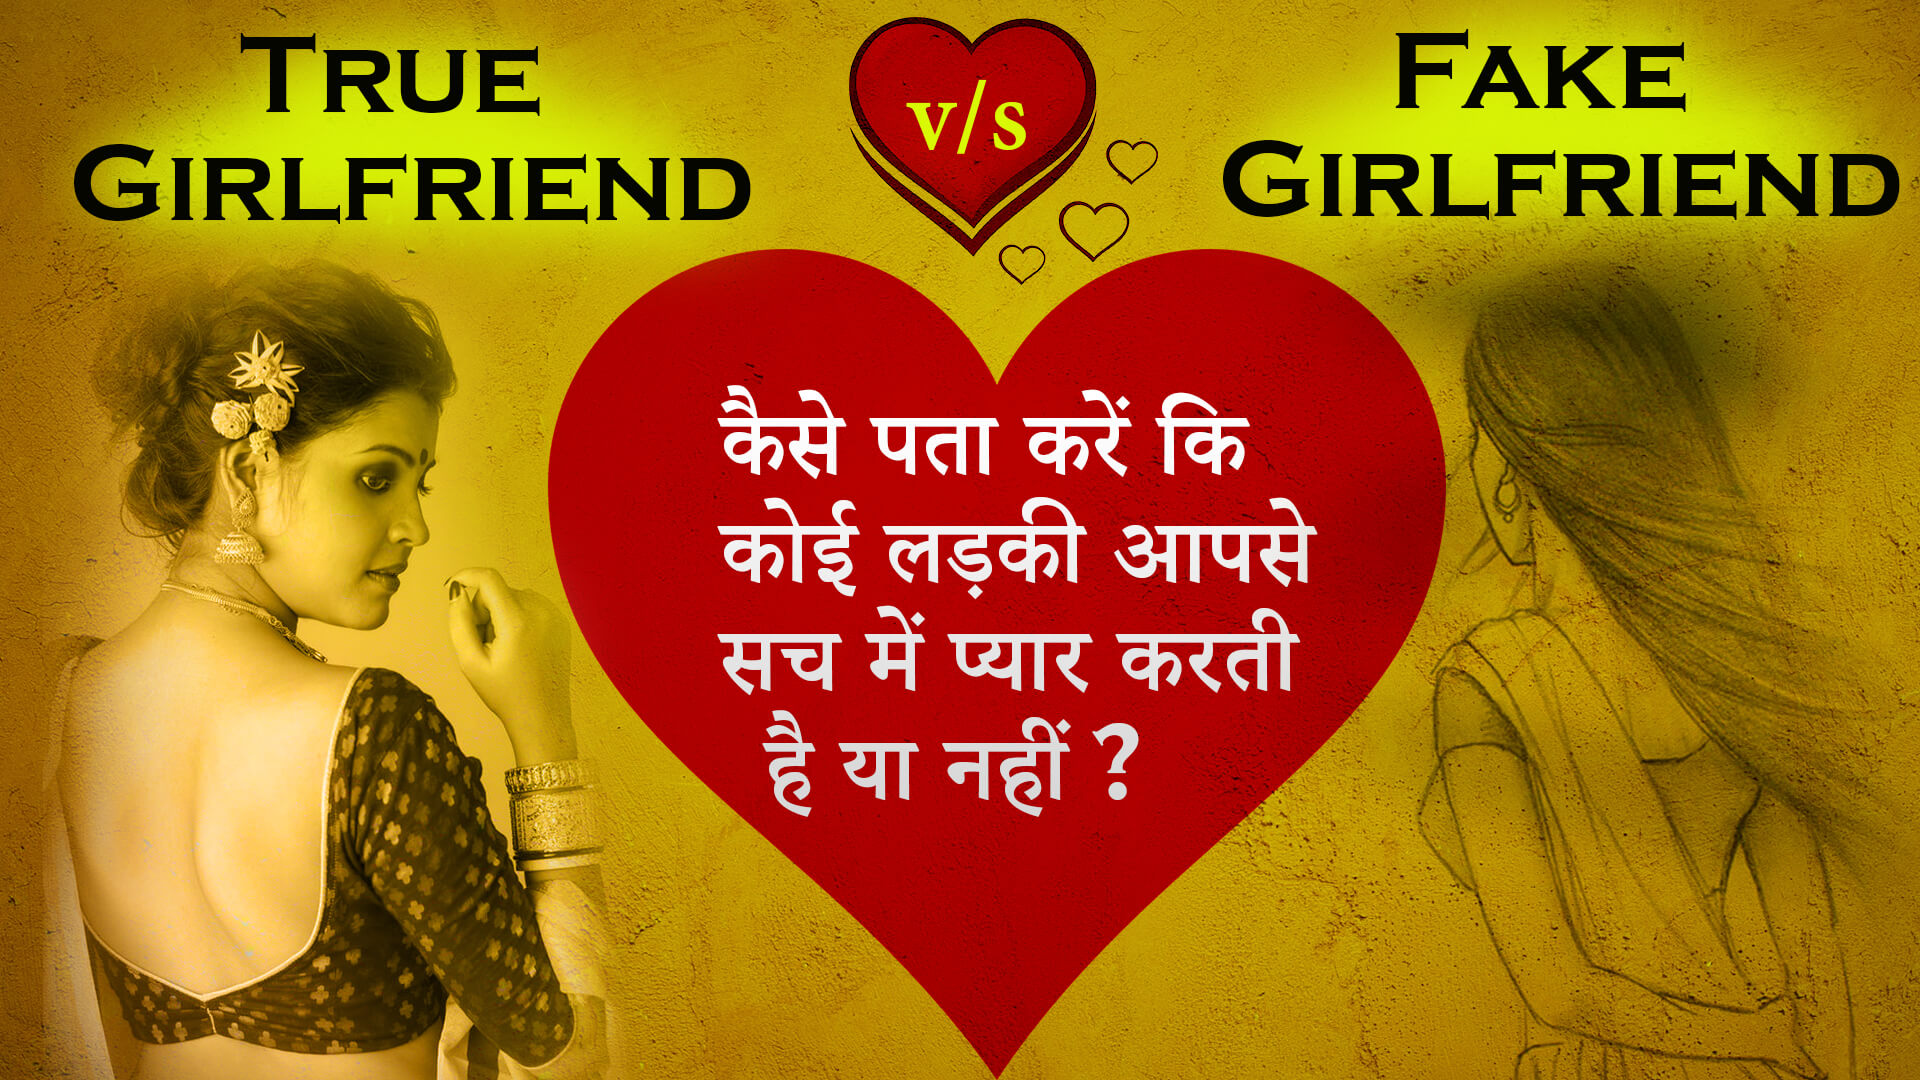 You are currently viewing True Girlfriend V/S Fake Girlfriend : How to Know a Girl Really Loves You or Not?